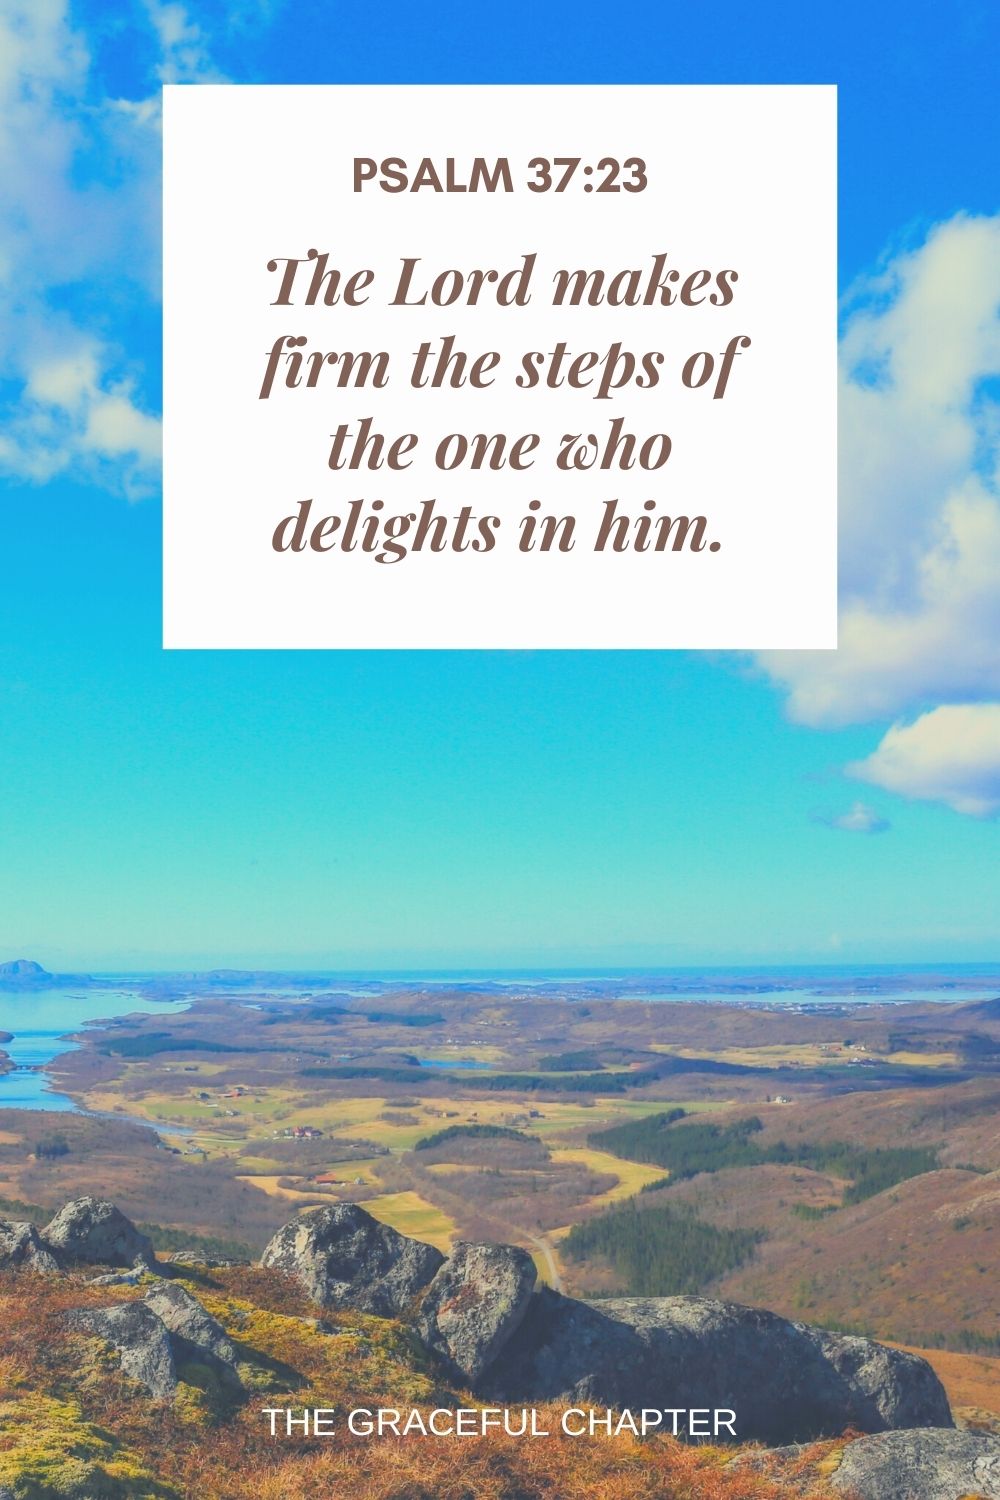 The Lord makes firm the steps of the one who delights in him. Psalm 37:23